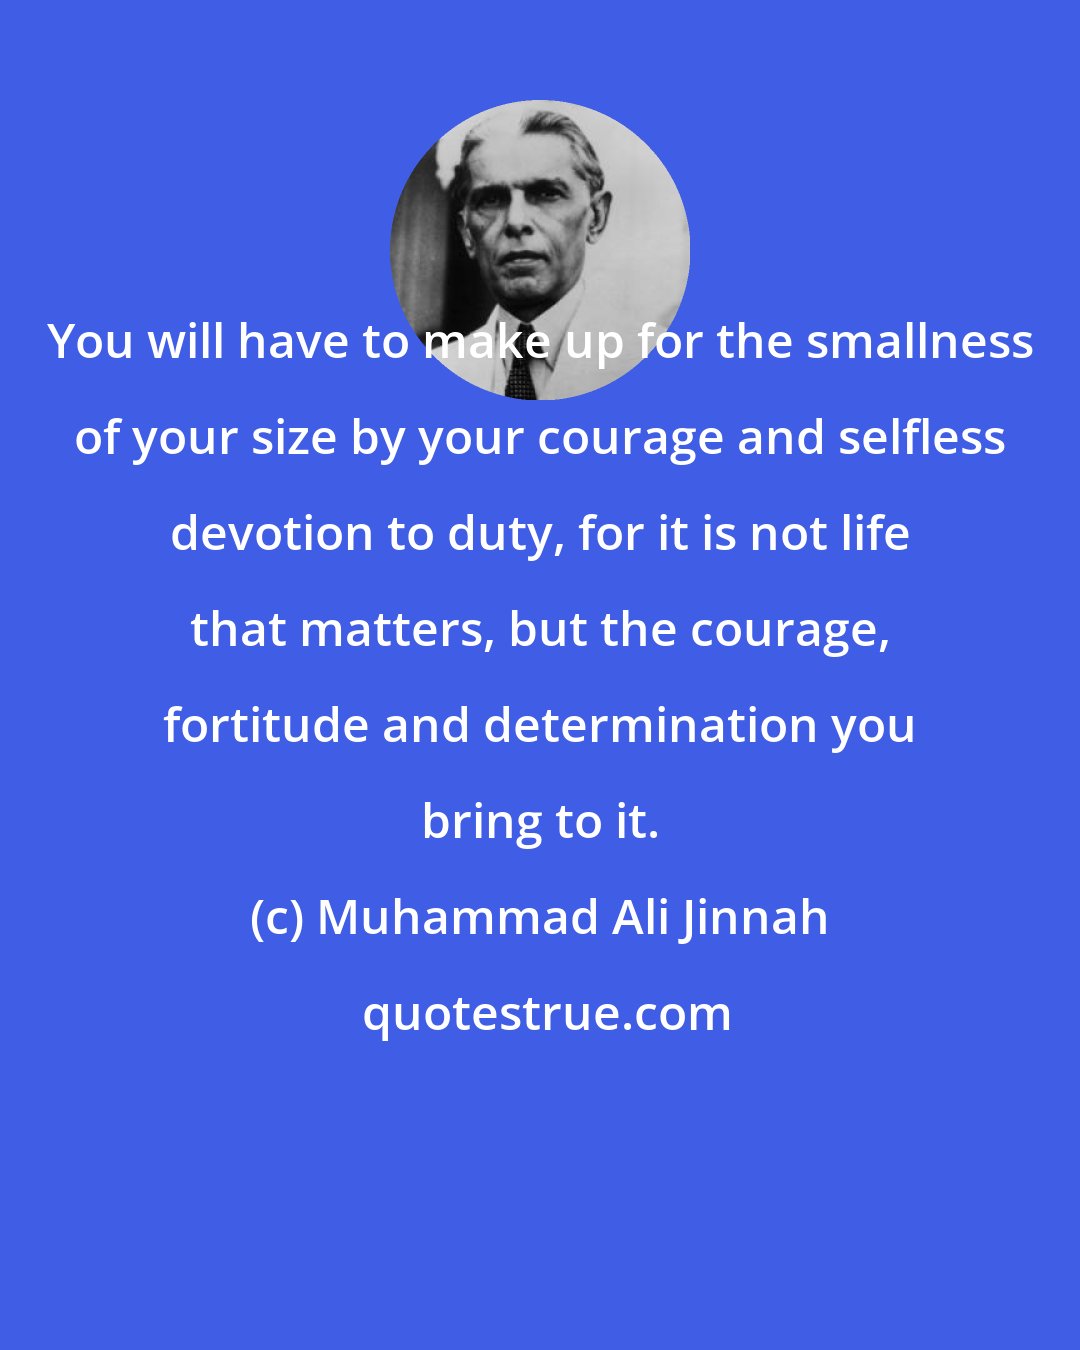 Muhammad Ali Jinnah: You will have to make up for the smallness of your size by your courage and selfless devotion to duty, for it is not life that matters, but the courage, fortitude and determination you bring to it.